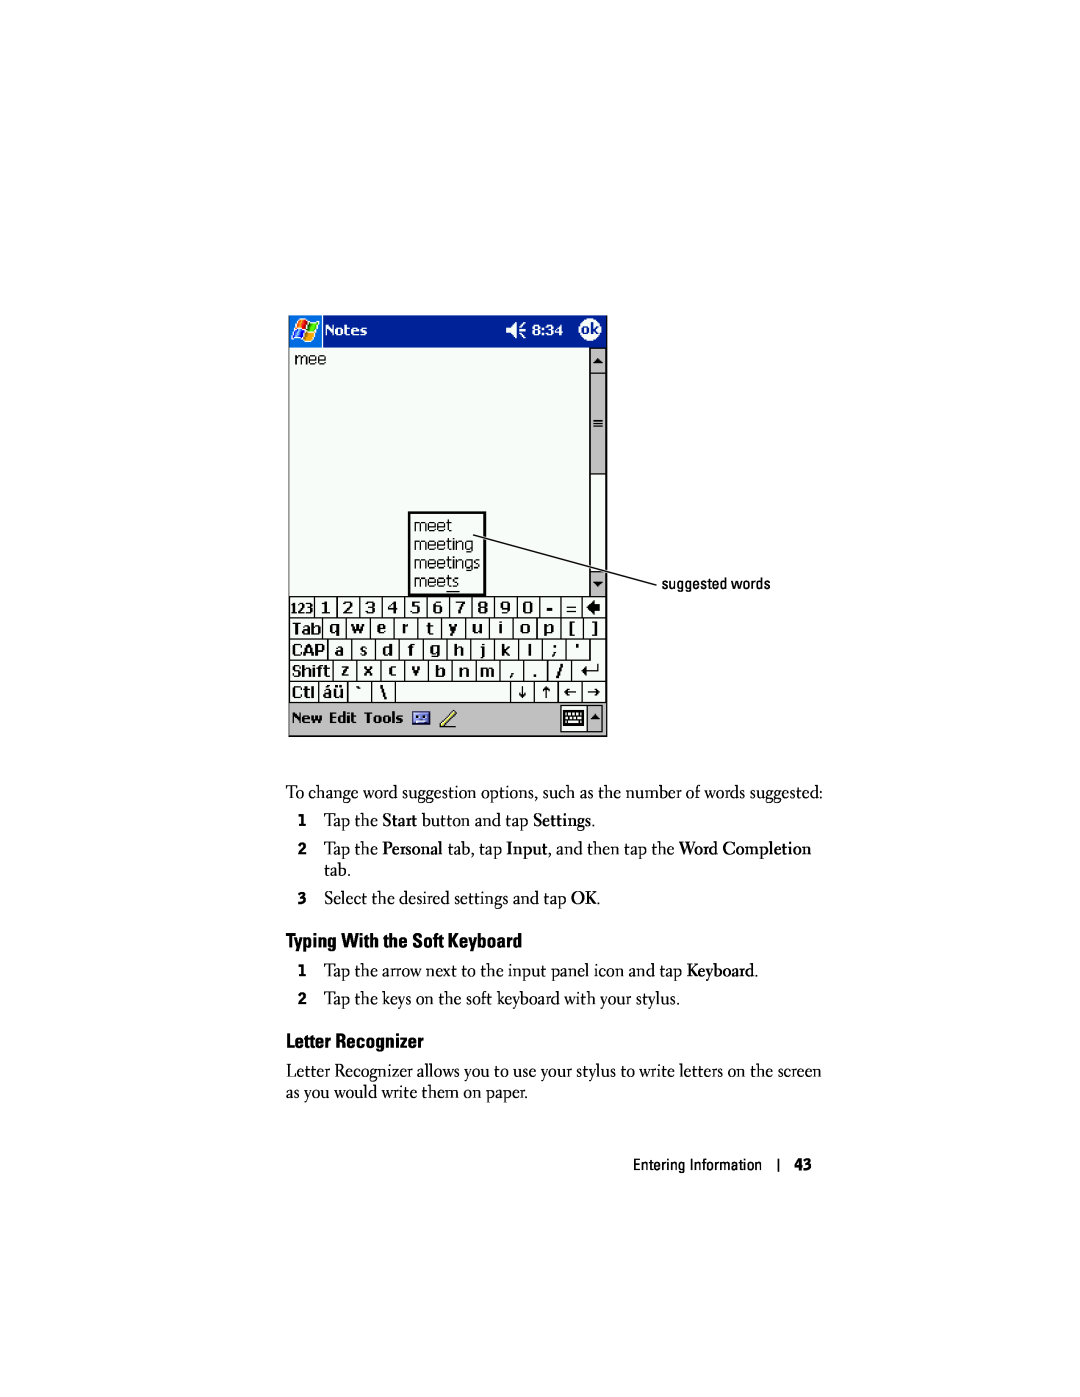 Dell HD03U, HC02U-C, HC02U-W, HC02U-B owner manual Typing With the Soft Keyboard, Letter Recognizer 